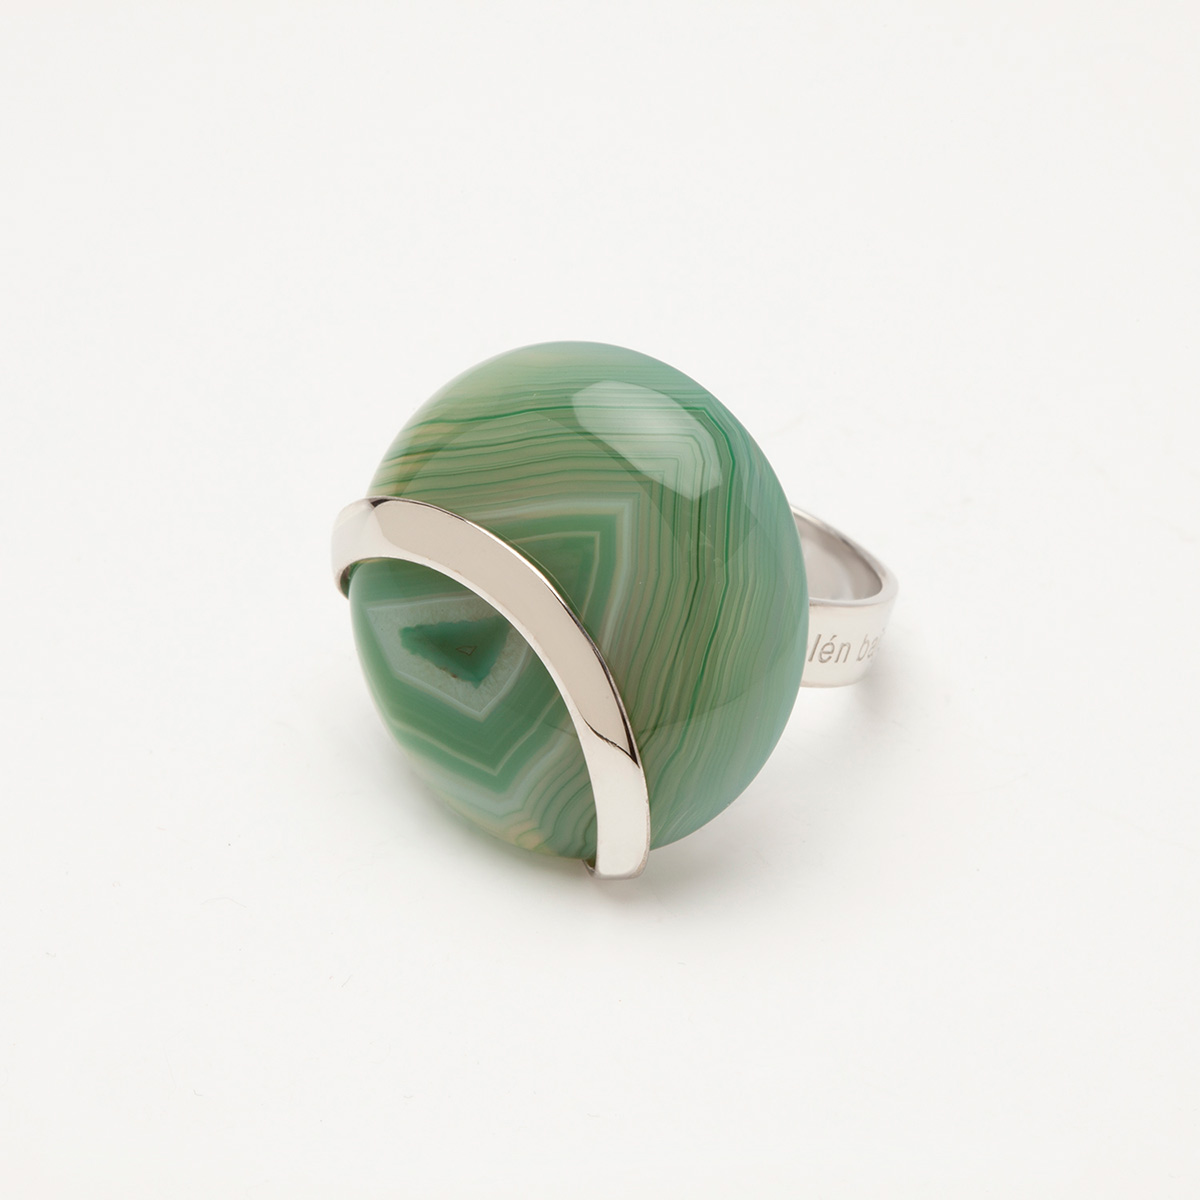 Abo handmade sterling silver and green banded agate ring 1 designed by Belen Bajo